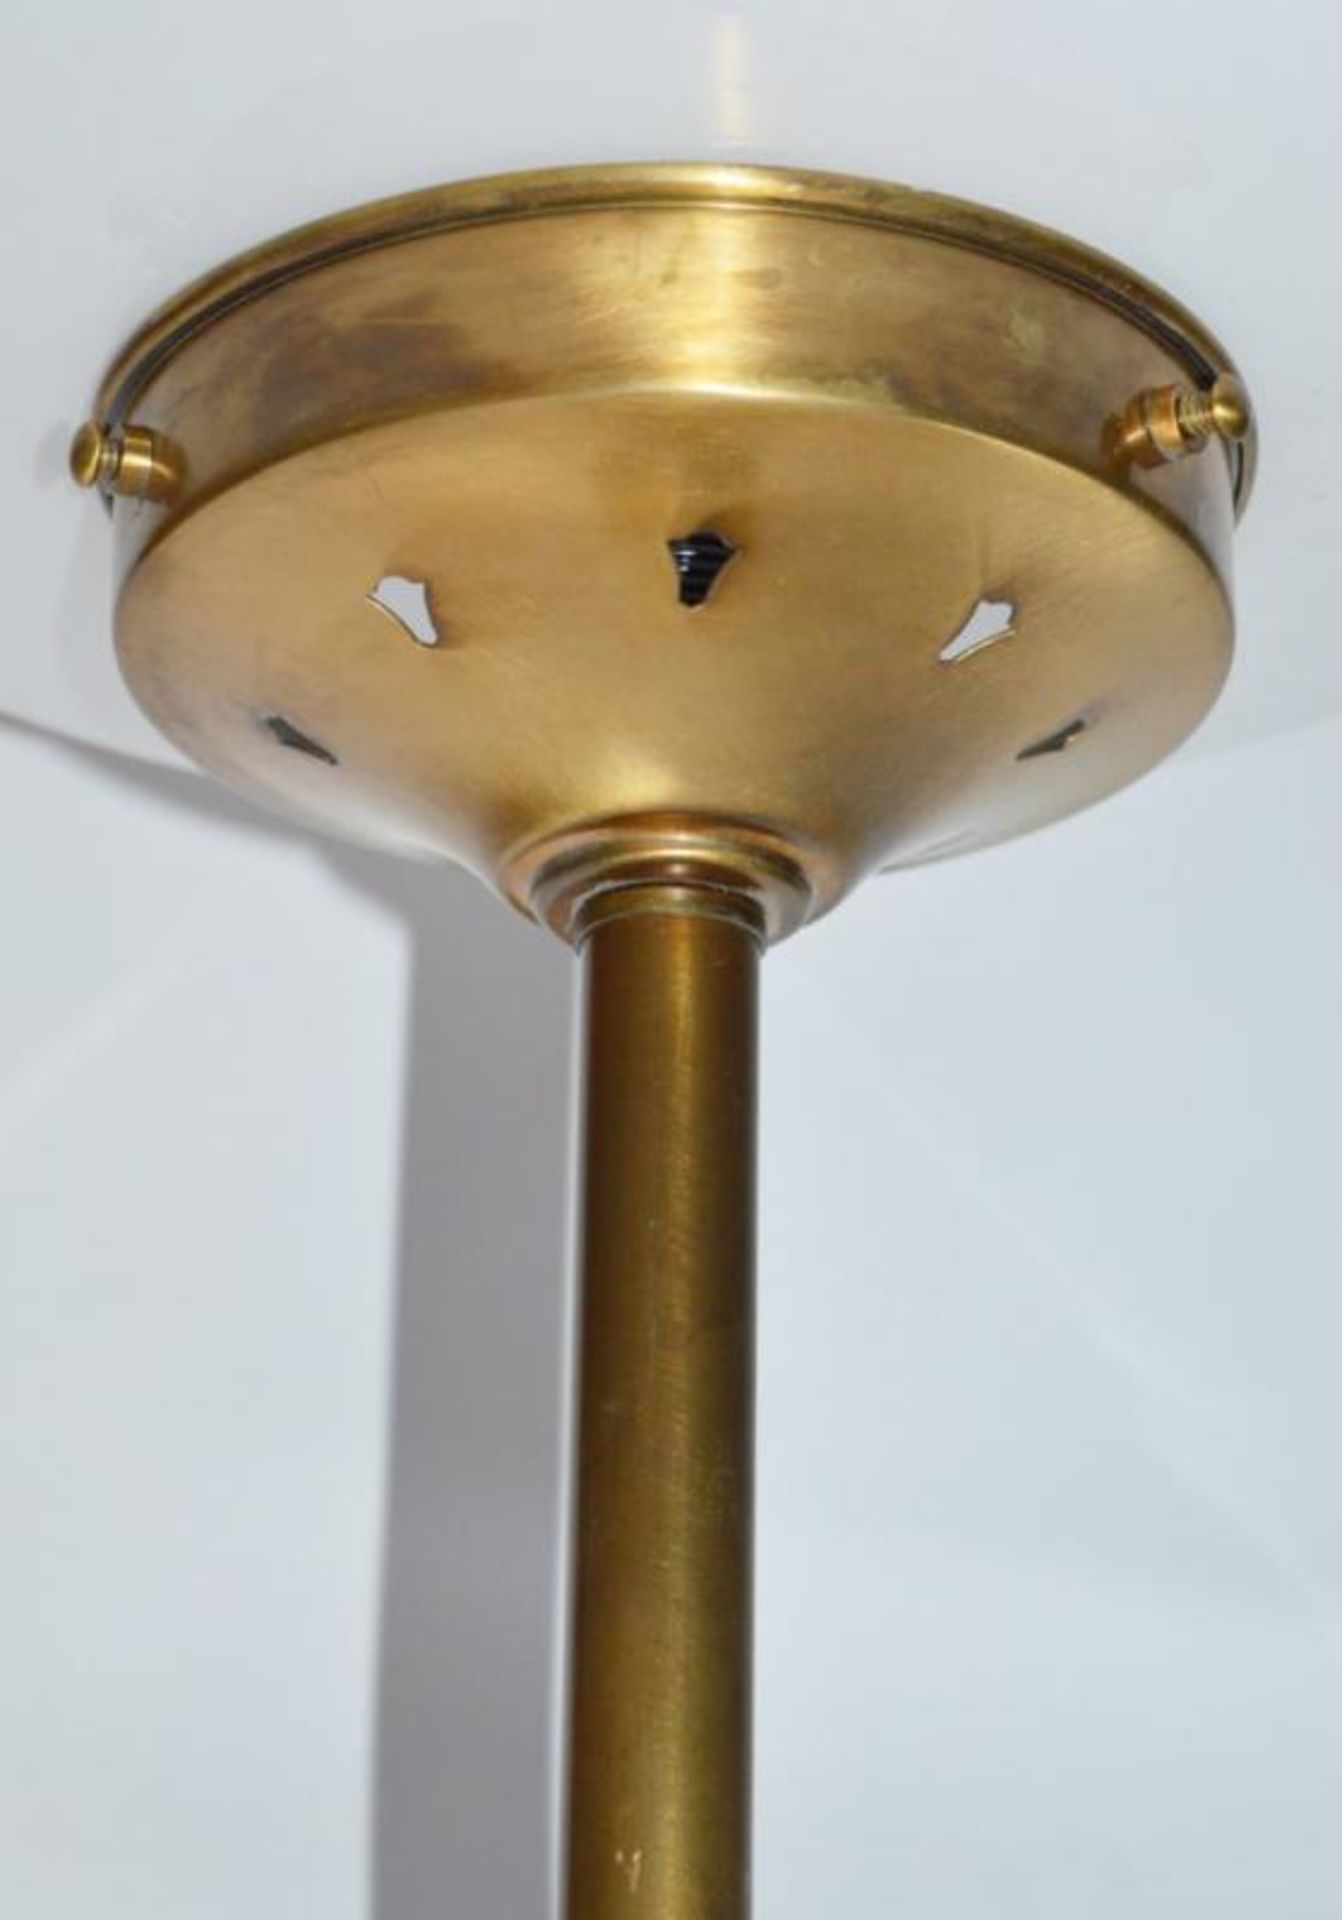 2 x Art Deco Style Lamps With Brass Bases and White Opal Glass Shades - Pair of - Suitable For Moun - Image 5 of 10